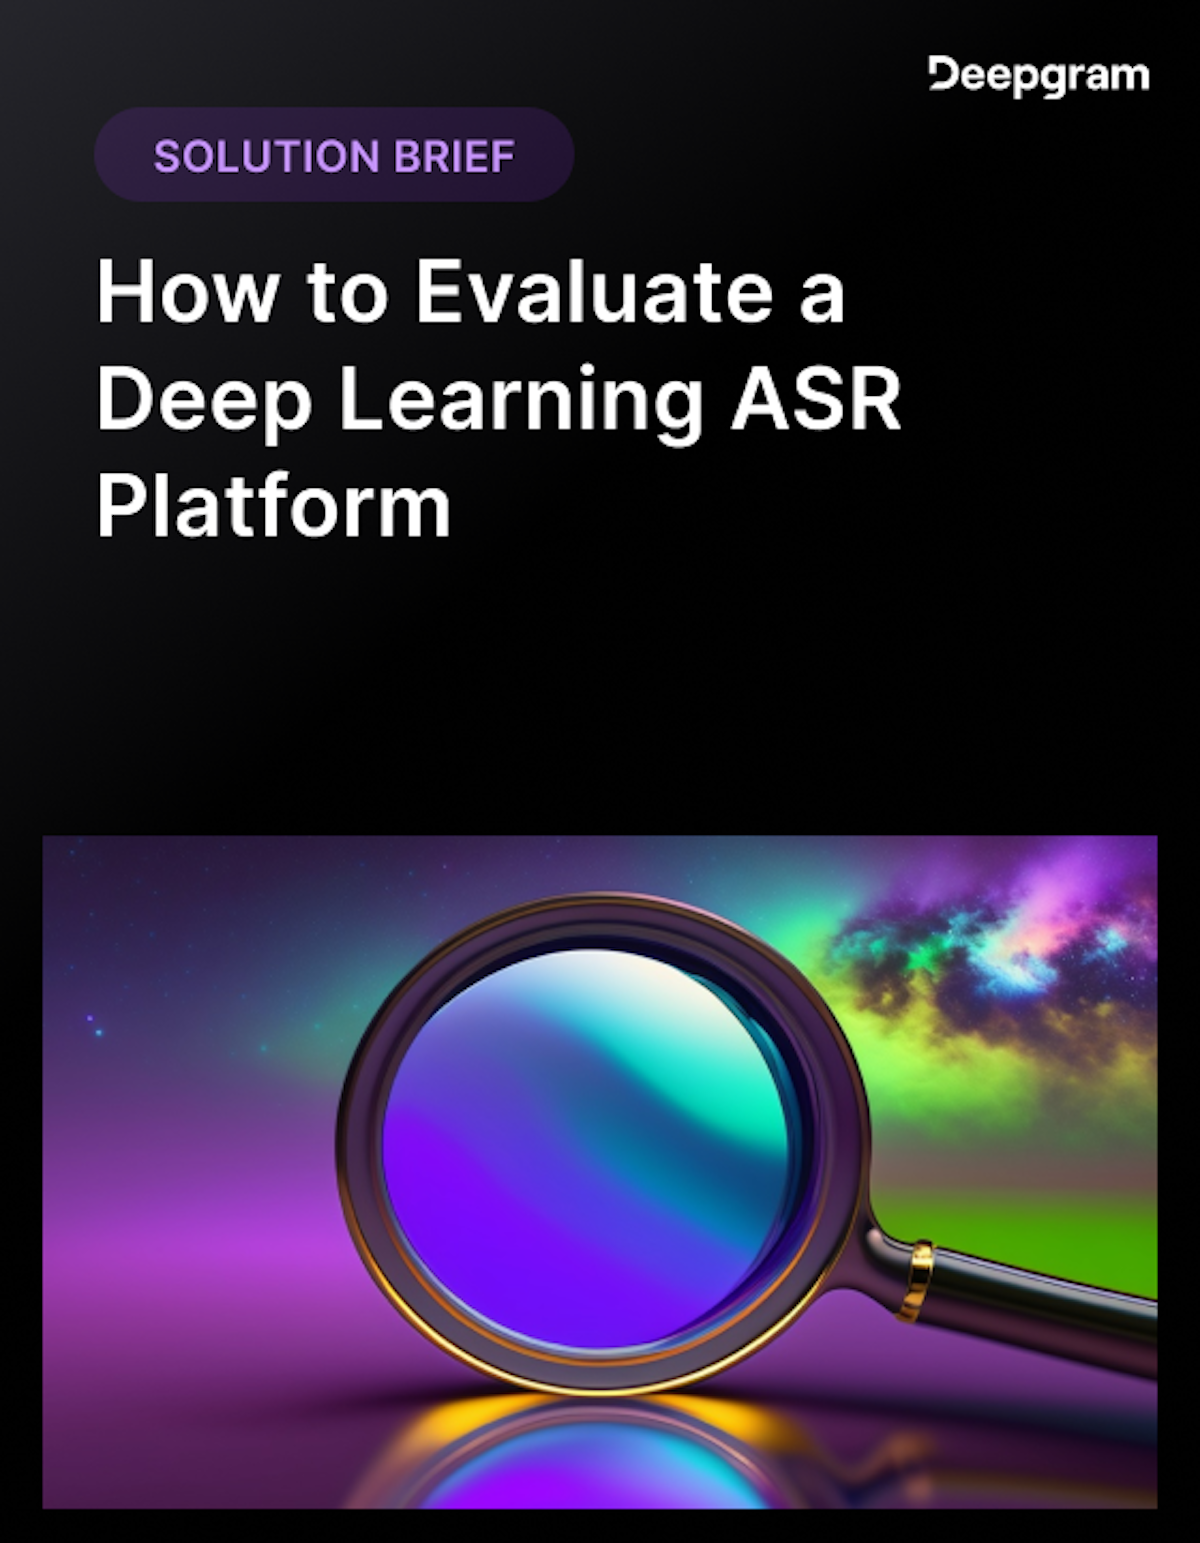 How to Evaluate a Deep Learning ASR Platform